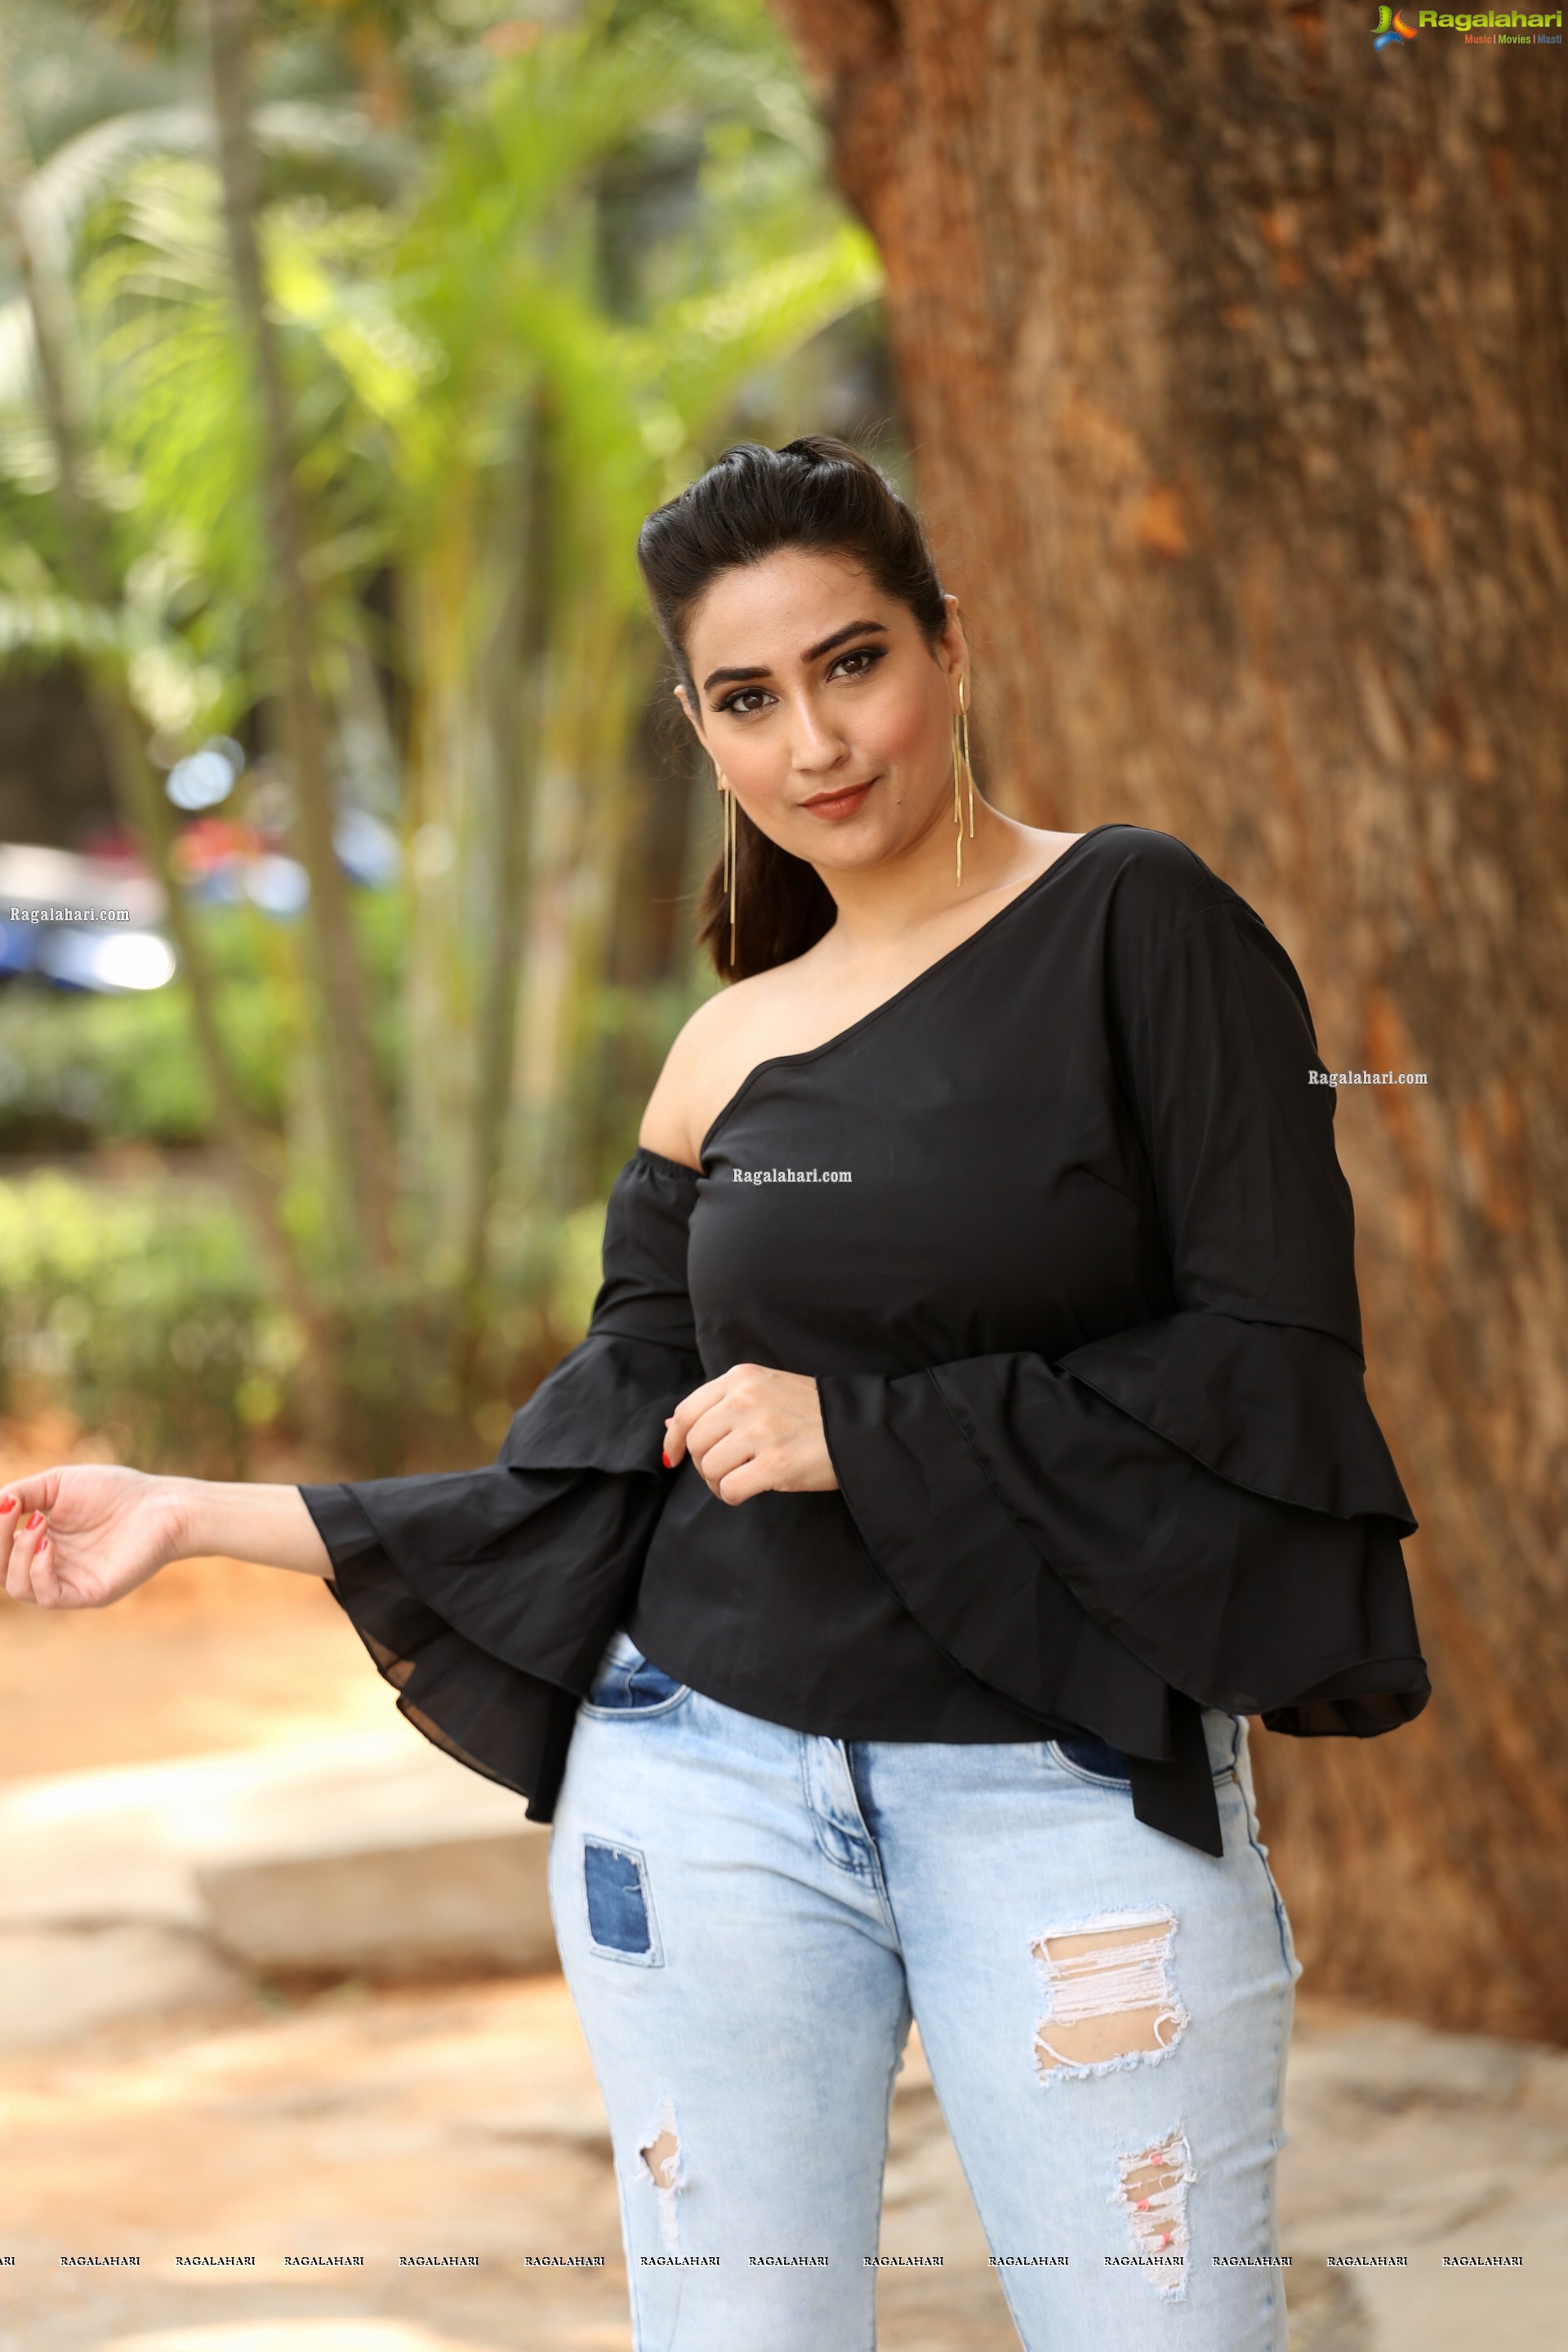 Manjusha in Black Ruffle One Shoulder Peplum Top With Tie Detail Exclusive Photo Shoot